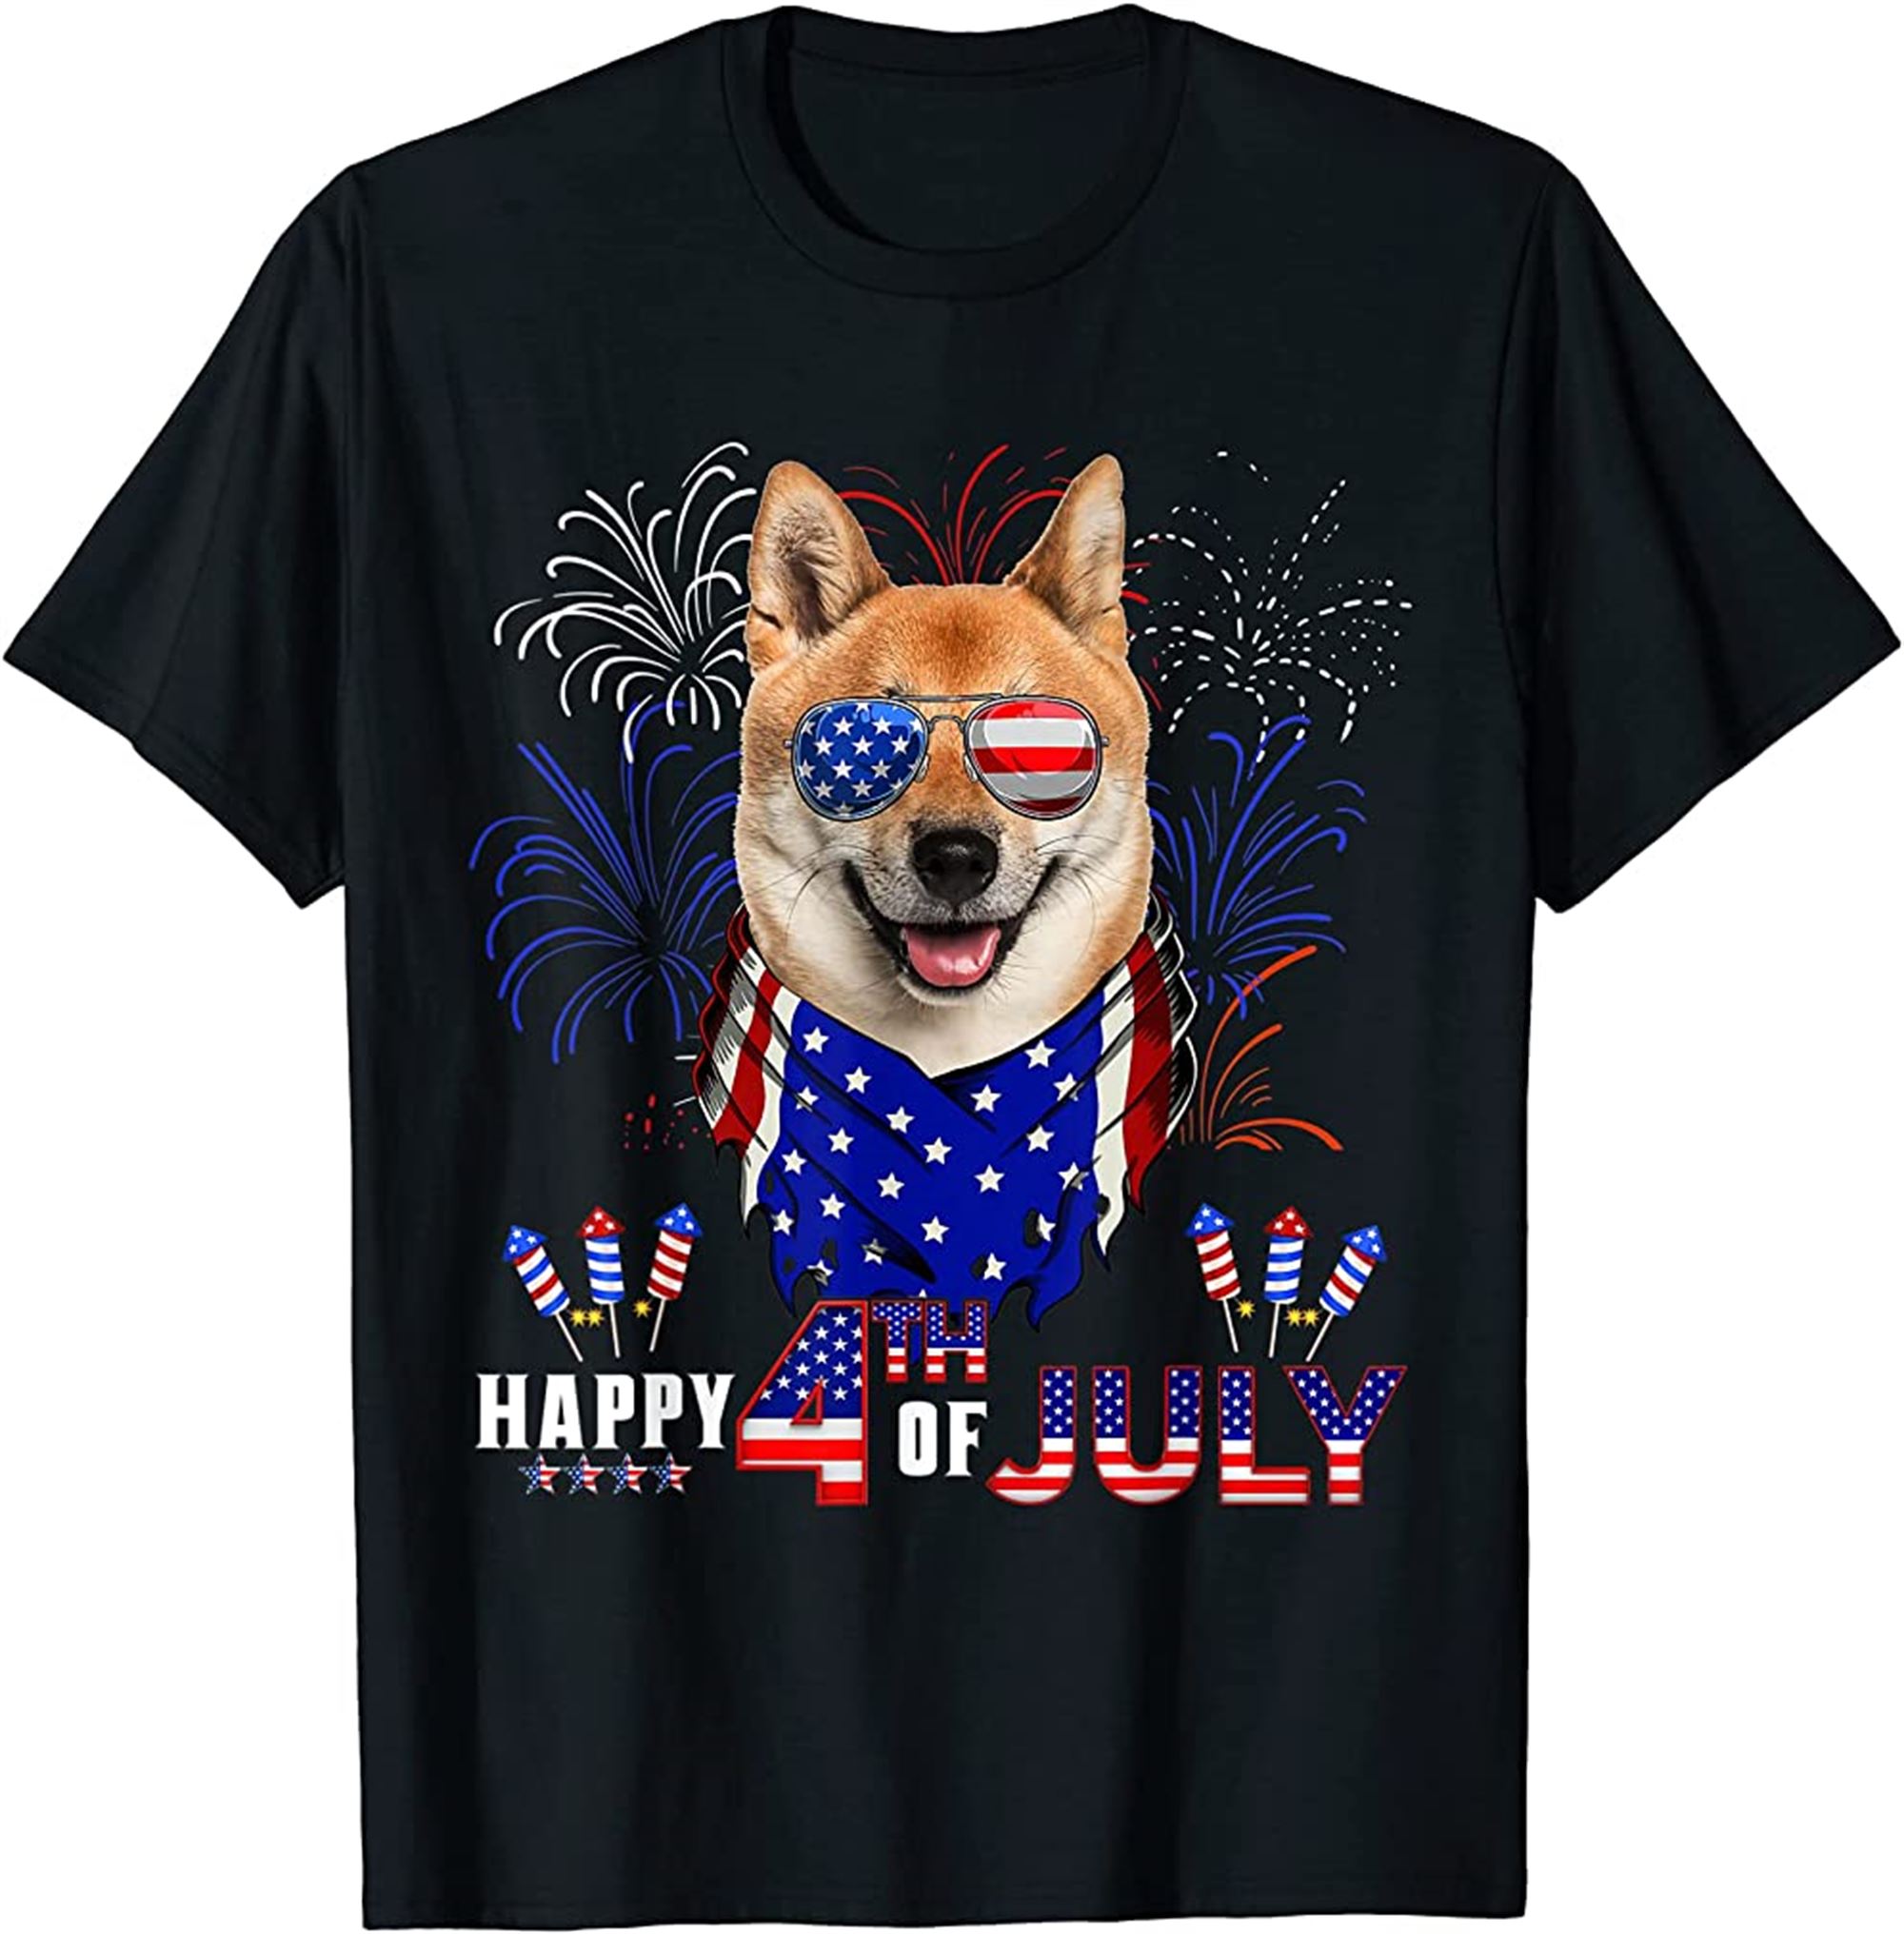 Happy 4th Of July American Flag Shiba Inu Dog Sunglasses T-shirt Plus Size Up To 5xl